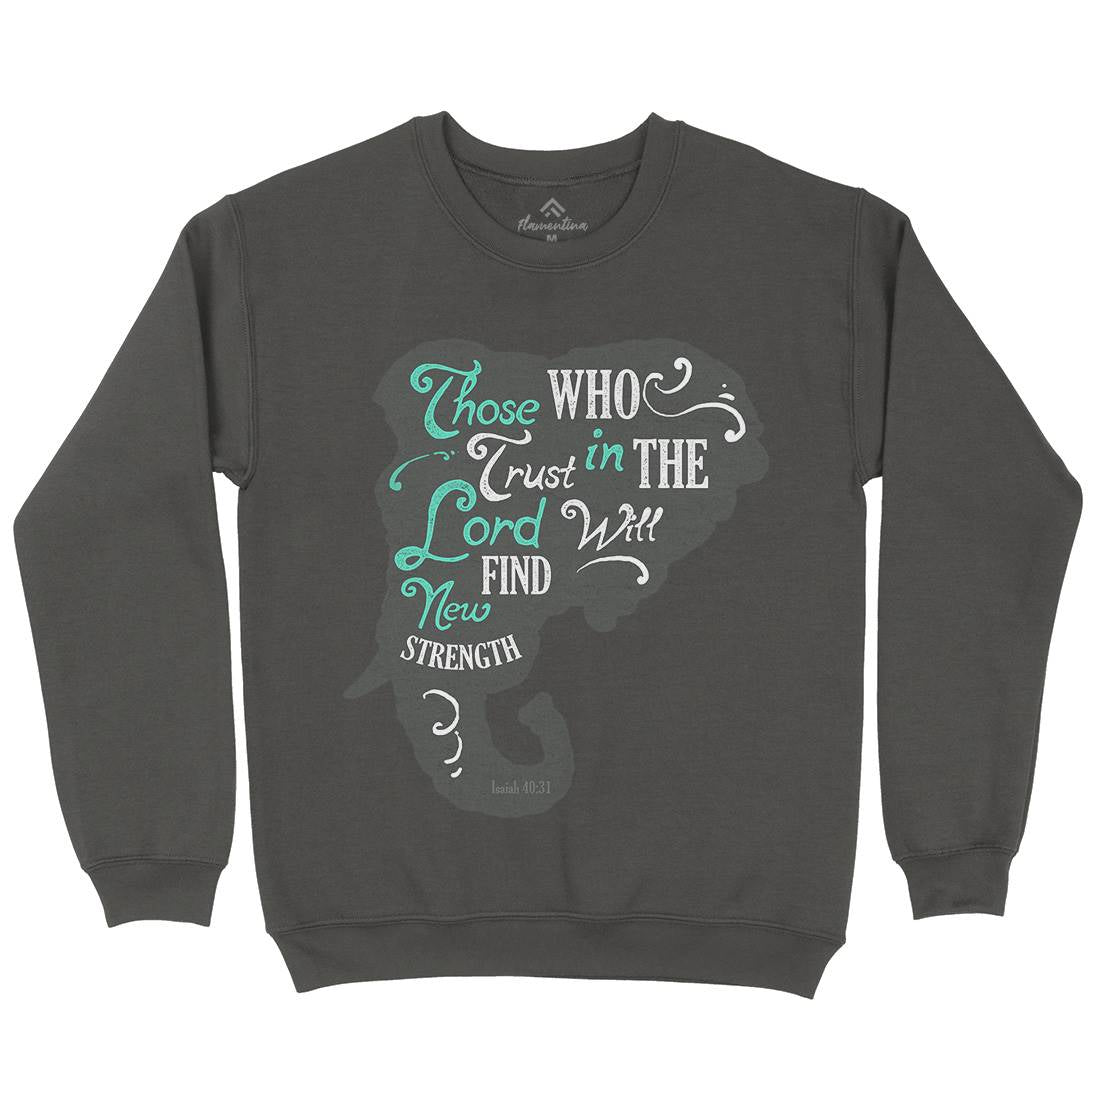 Trust In The Lord Kids Crew Neck Sweatshirt Religion A390